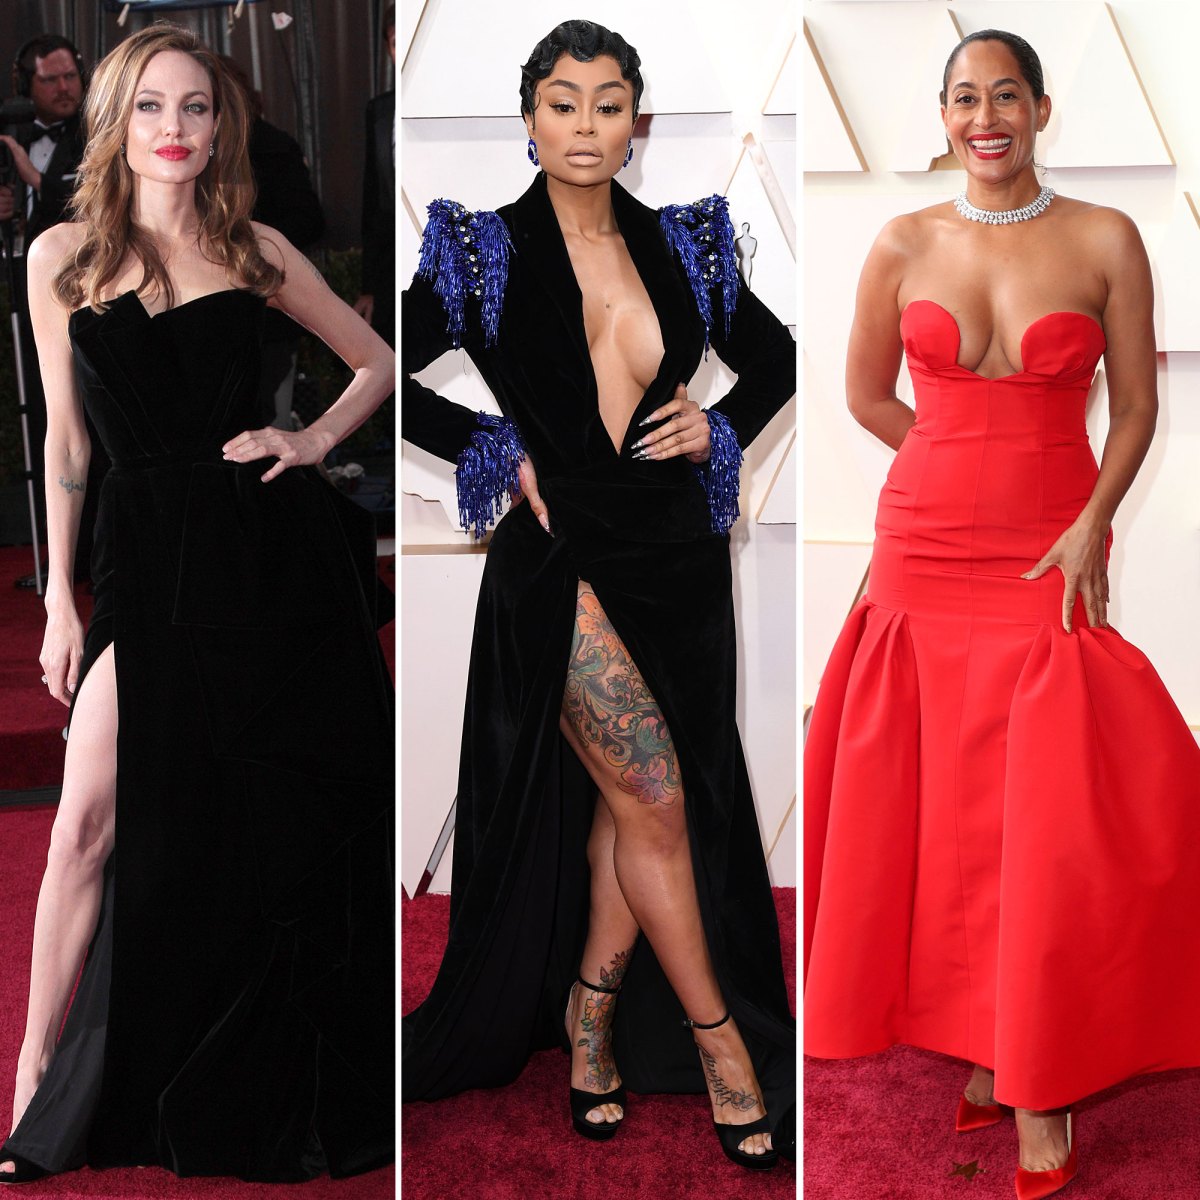 The Most Daring Red Carpet Looks of All Time